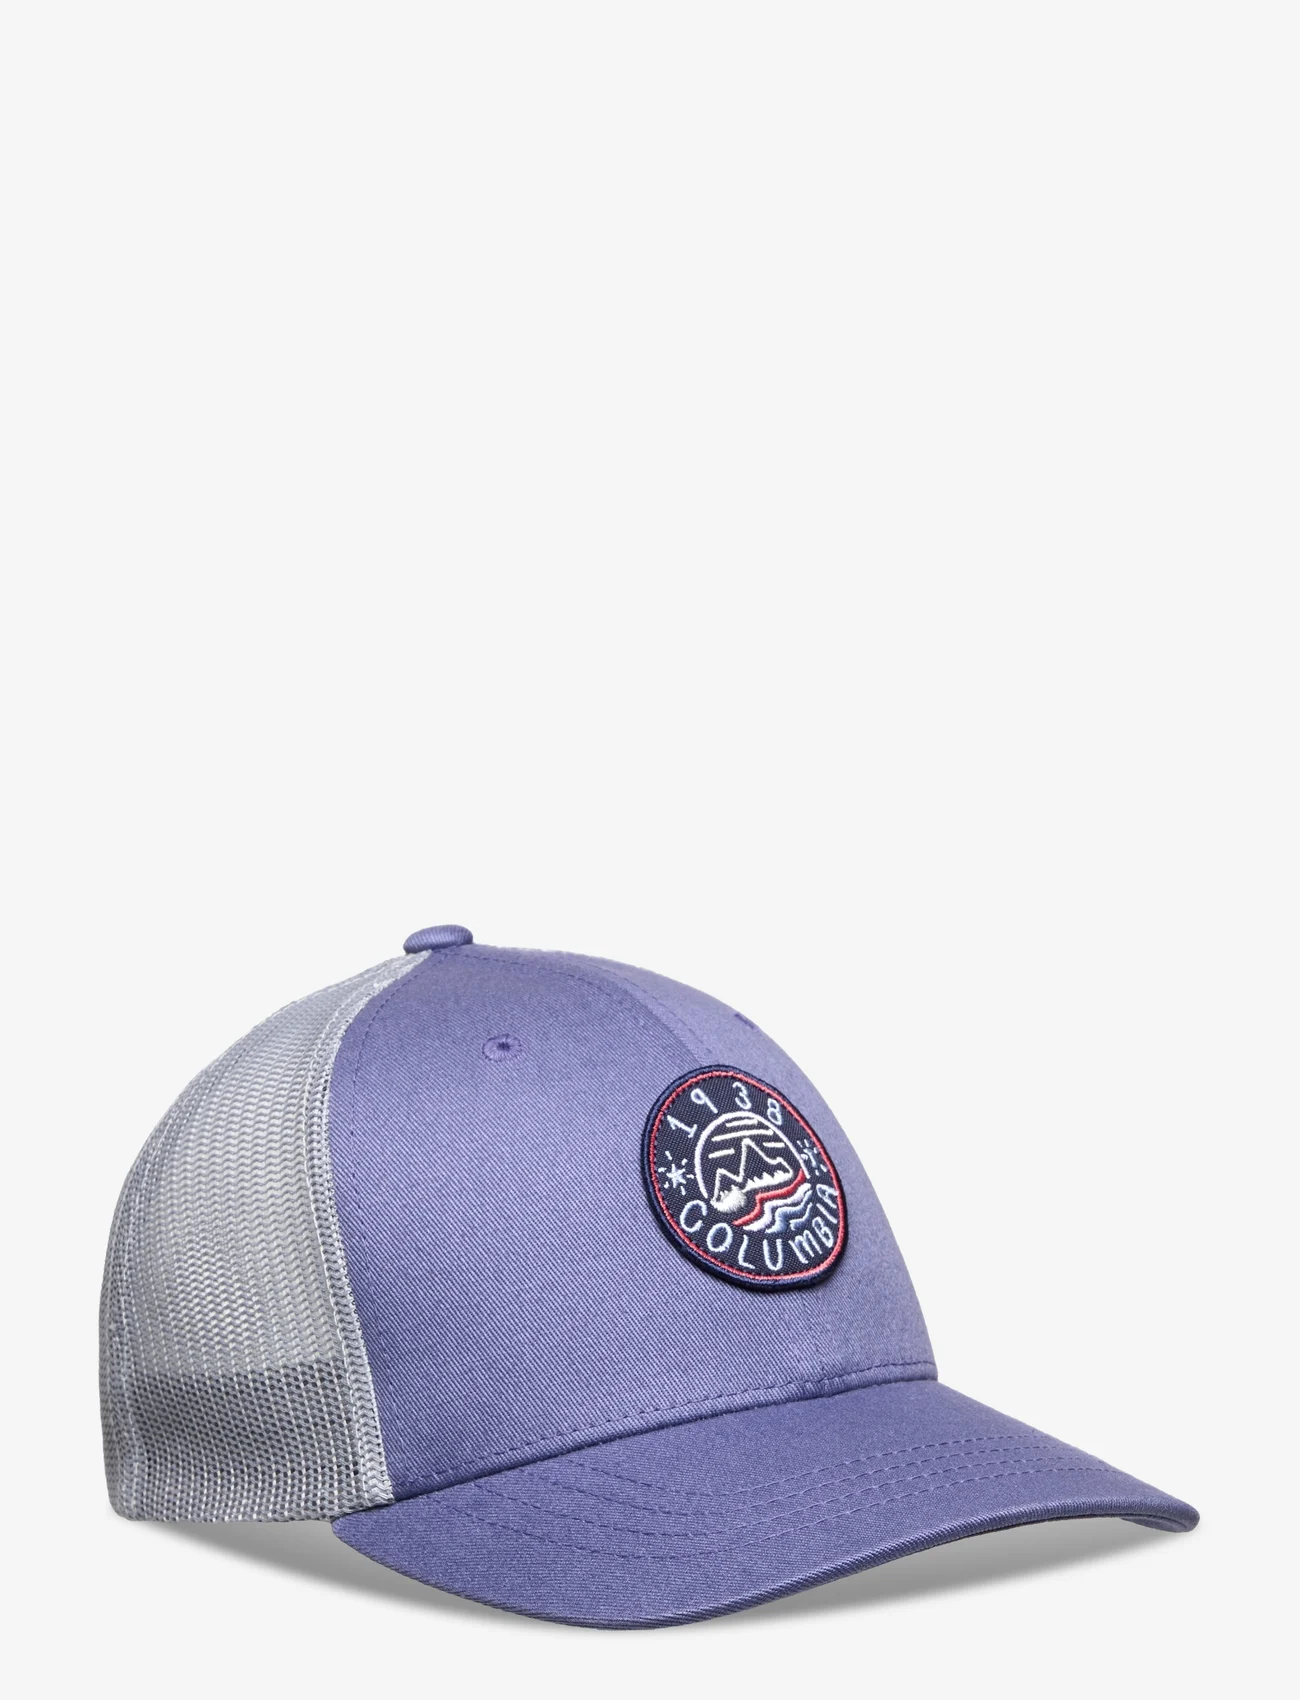 Columbia Sportswear - Columbia Youth Snap Back - sommerkupp - eve, cirrus grey, hot marker waves - 0